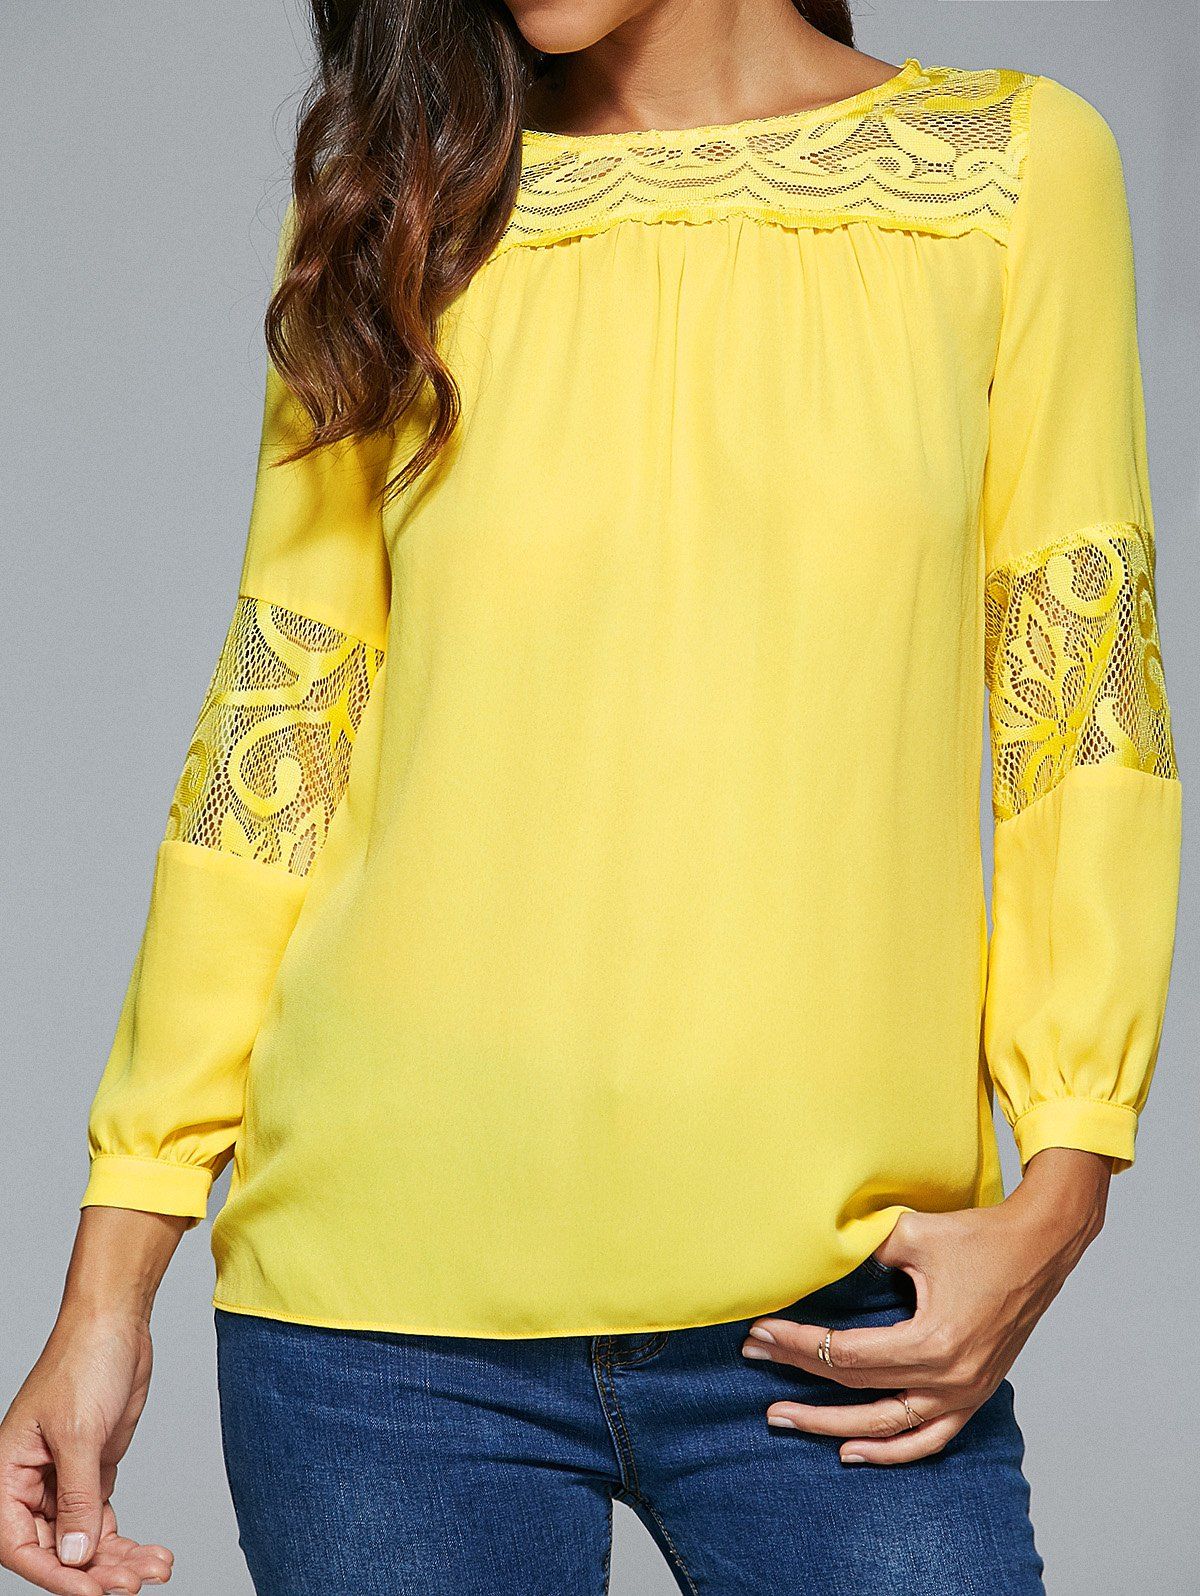 Yellow Xl Lace Spliced Long Sleeve Blouse | RoseGal.com